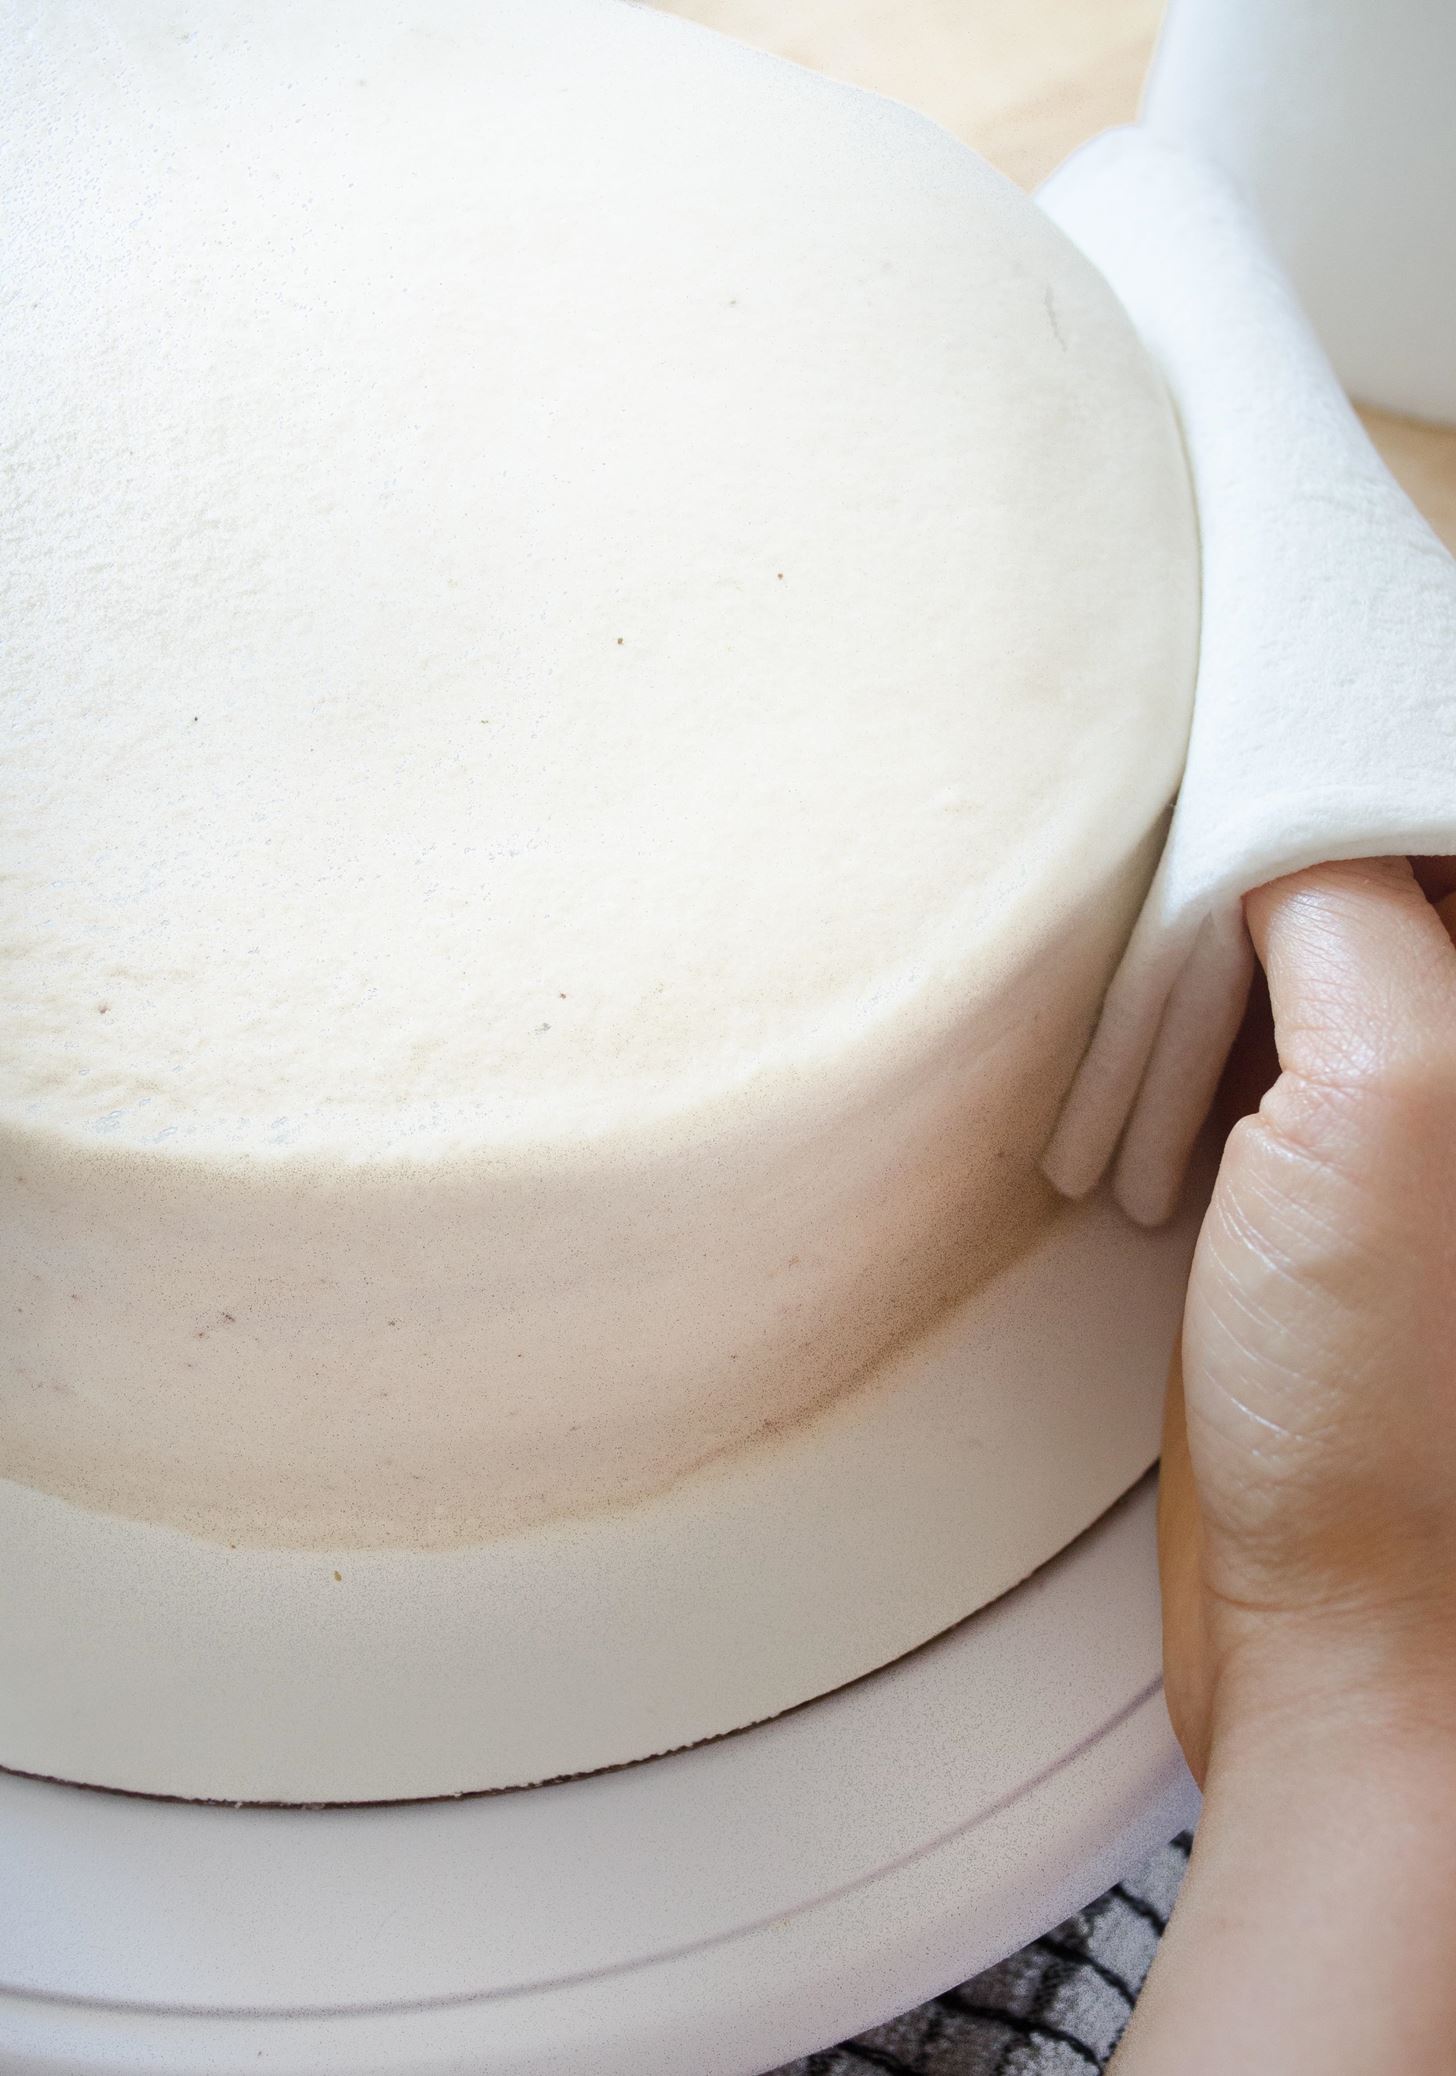 Skip the Fondant—Make Picture-Perfect Cakes with Paper Towels Instead